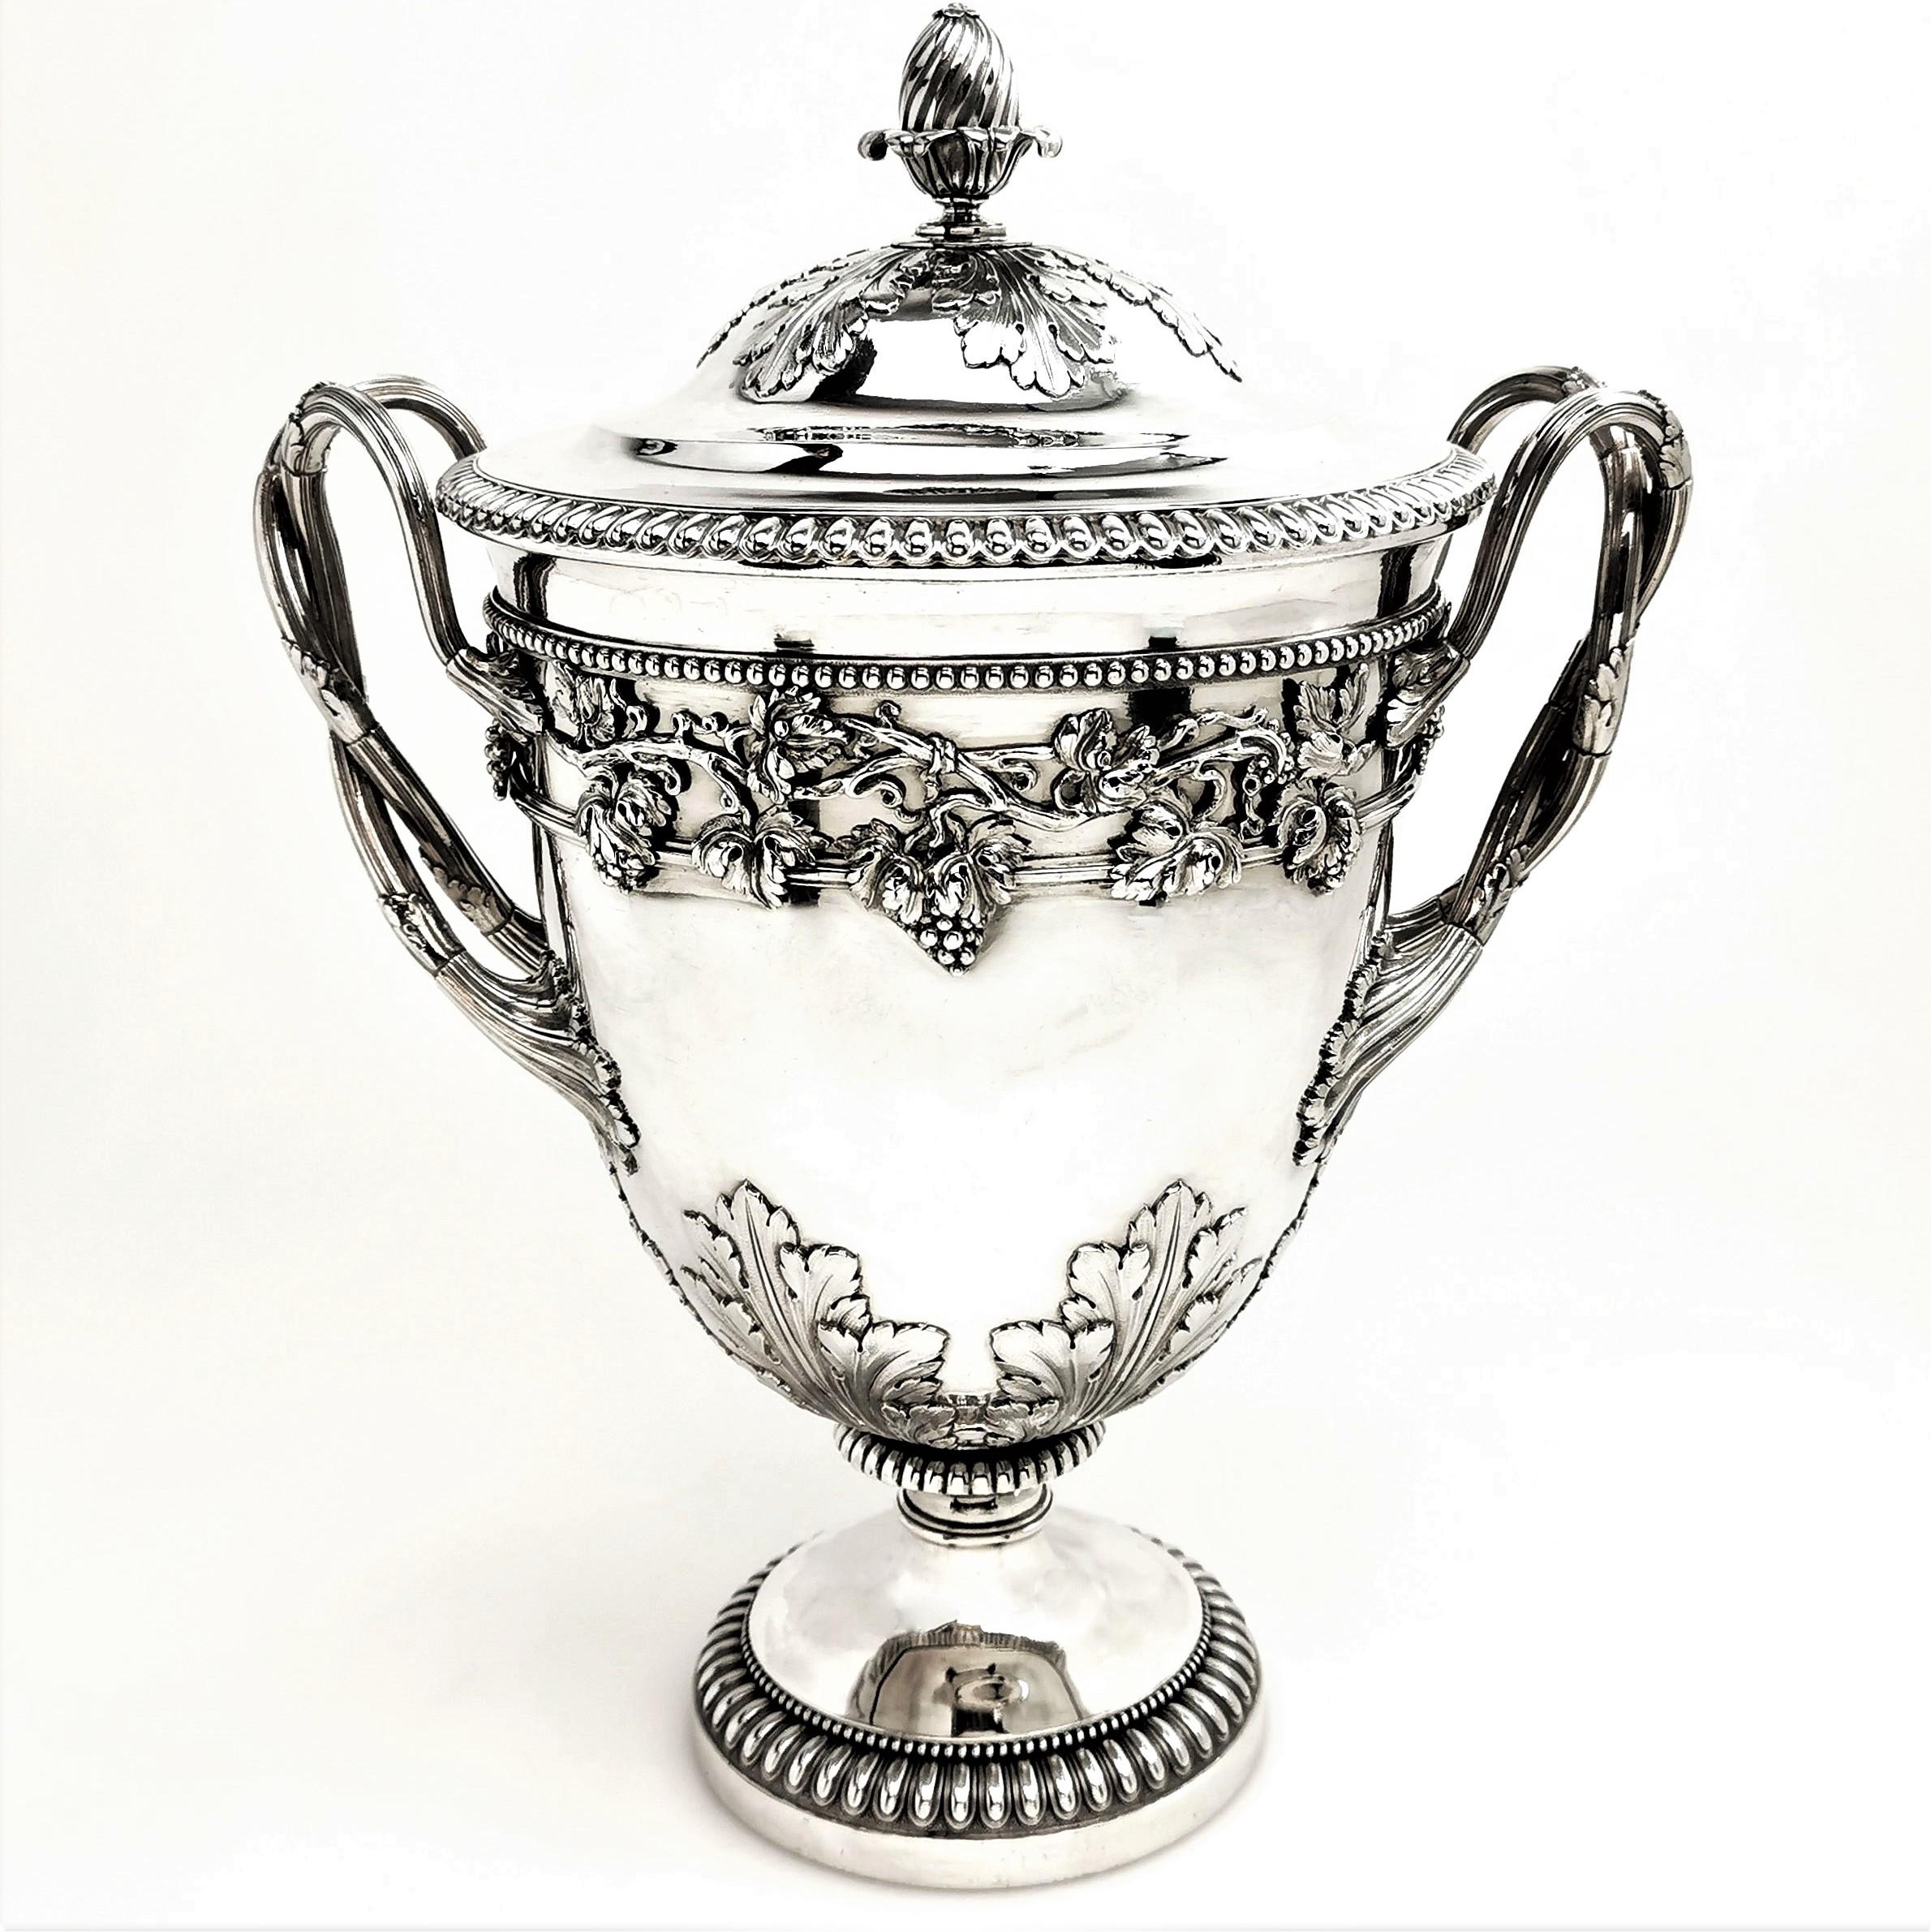 An impressive George III Antique solid Silver Cup & Cover featuring a beautiful embellished exterior. The Cup has a pair of leaf decorated handles, each a pair of intertwined branches. The handles join a detailed applied vine, grape and leaf band